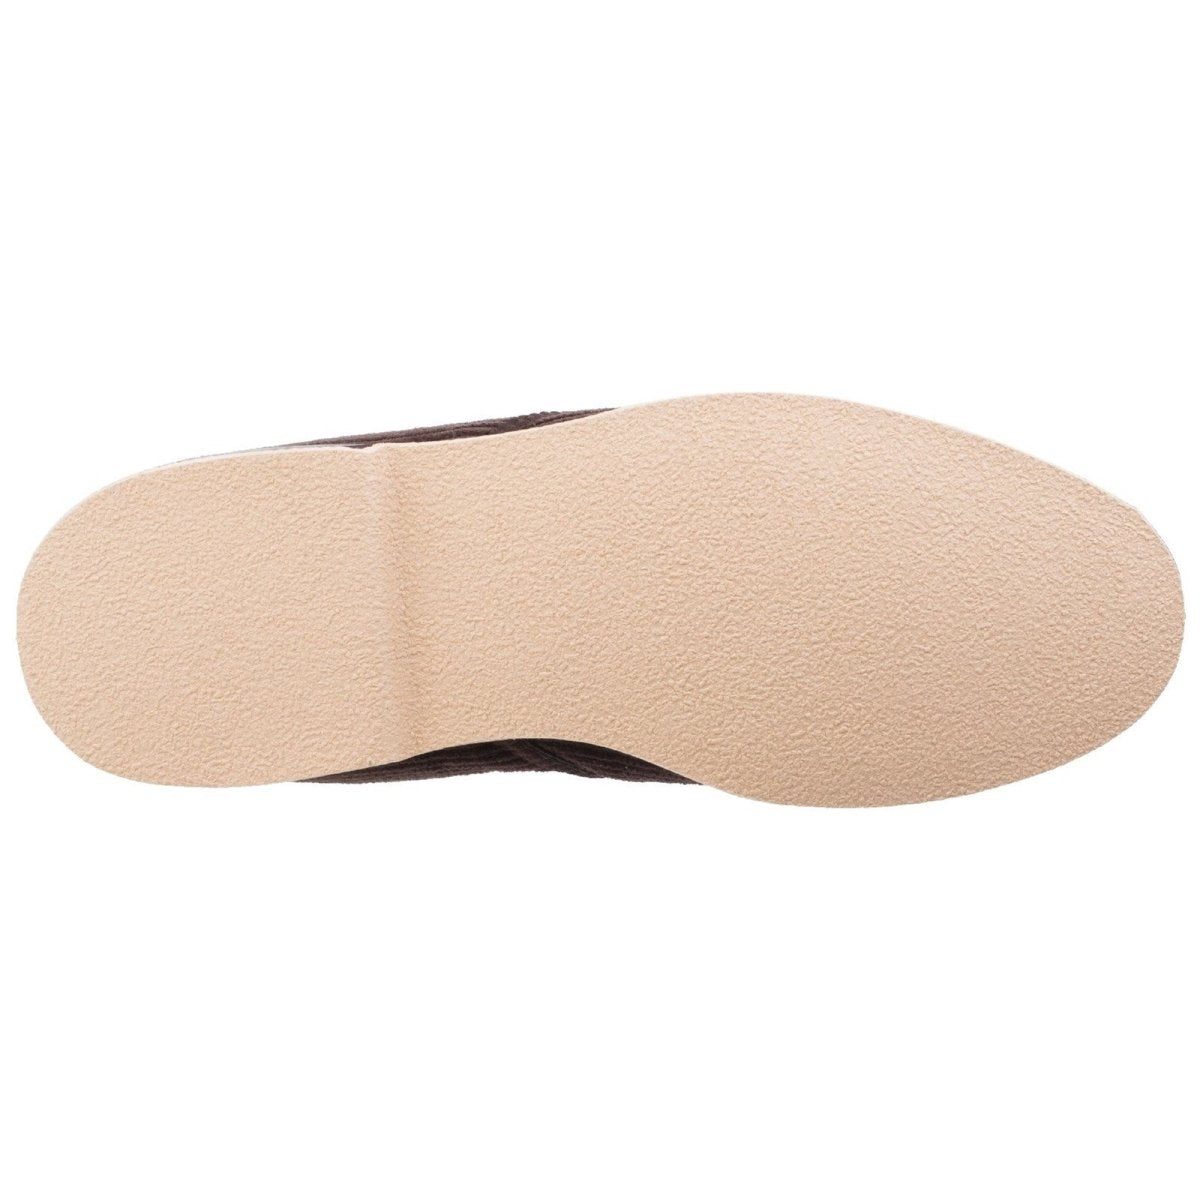 GBS Exeter Mens Traditional Twin Gusset Slippers - Shoe Store Direct